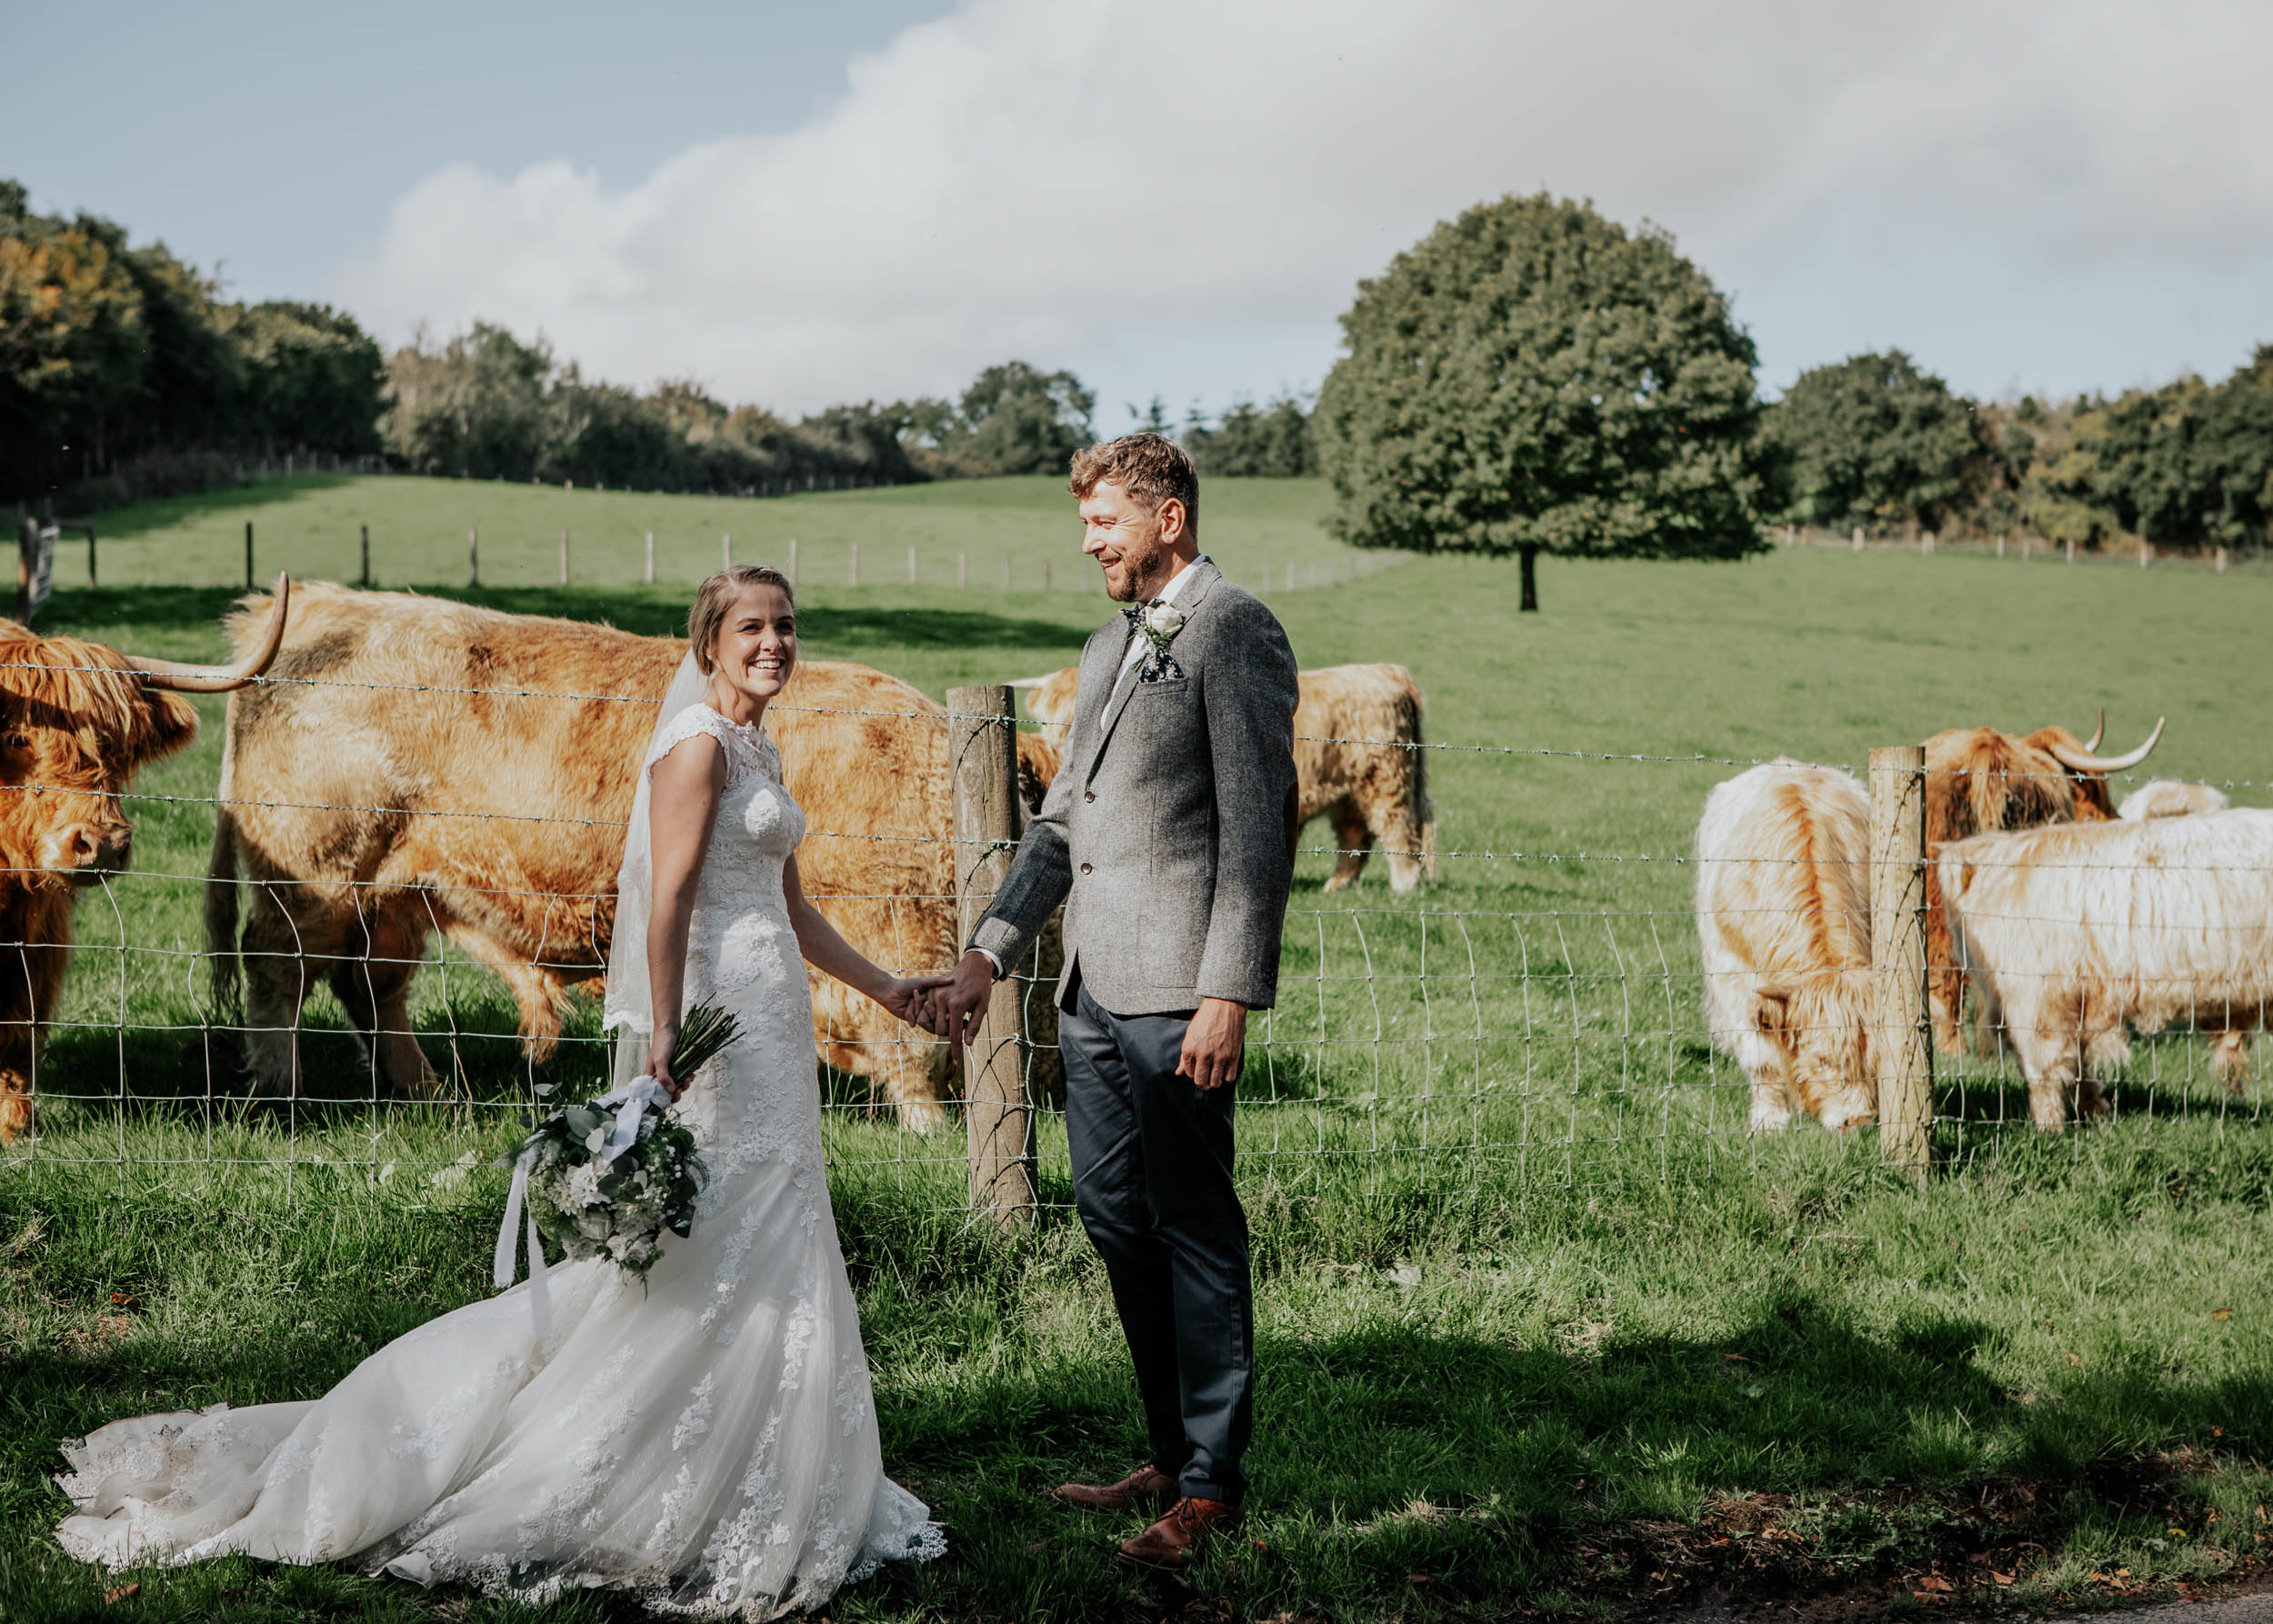 Bride and groom standing holding hands with cows behind them